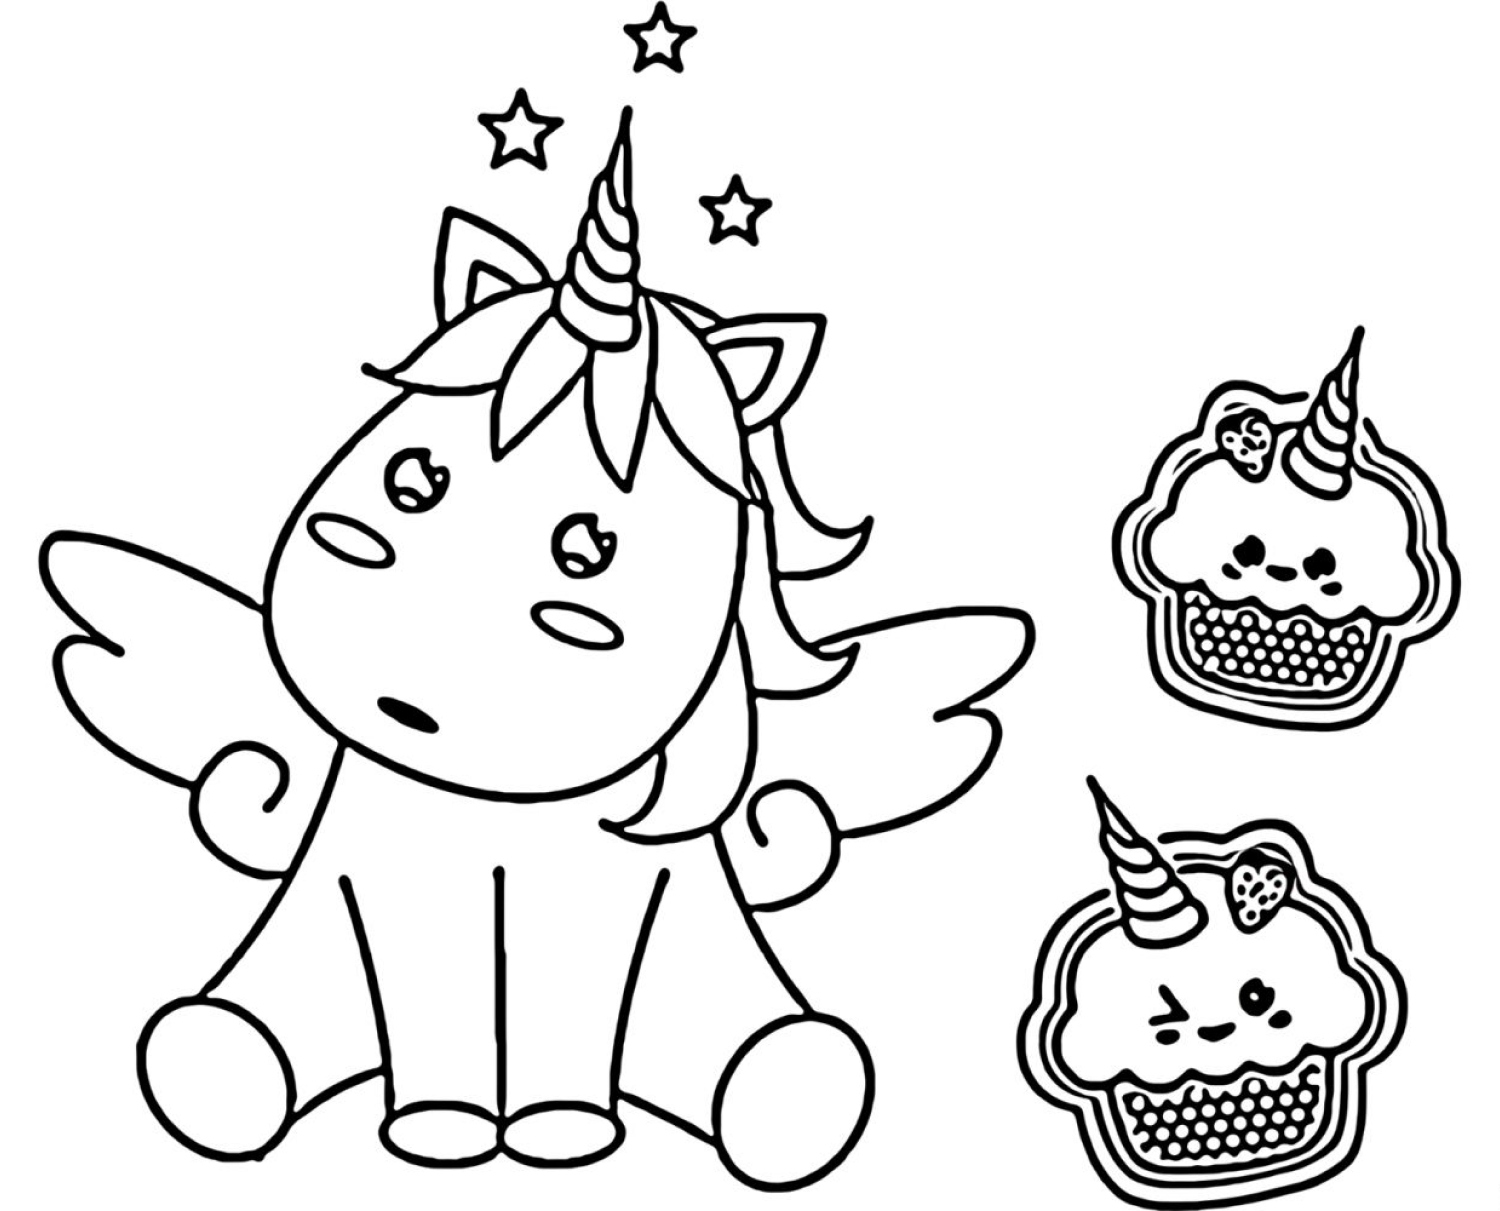 Unicorn Coloring Pages for Girls – Print for free